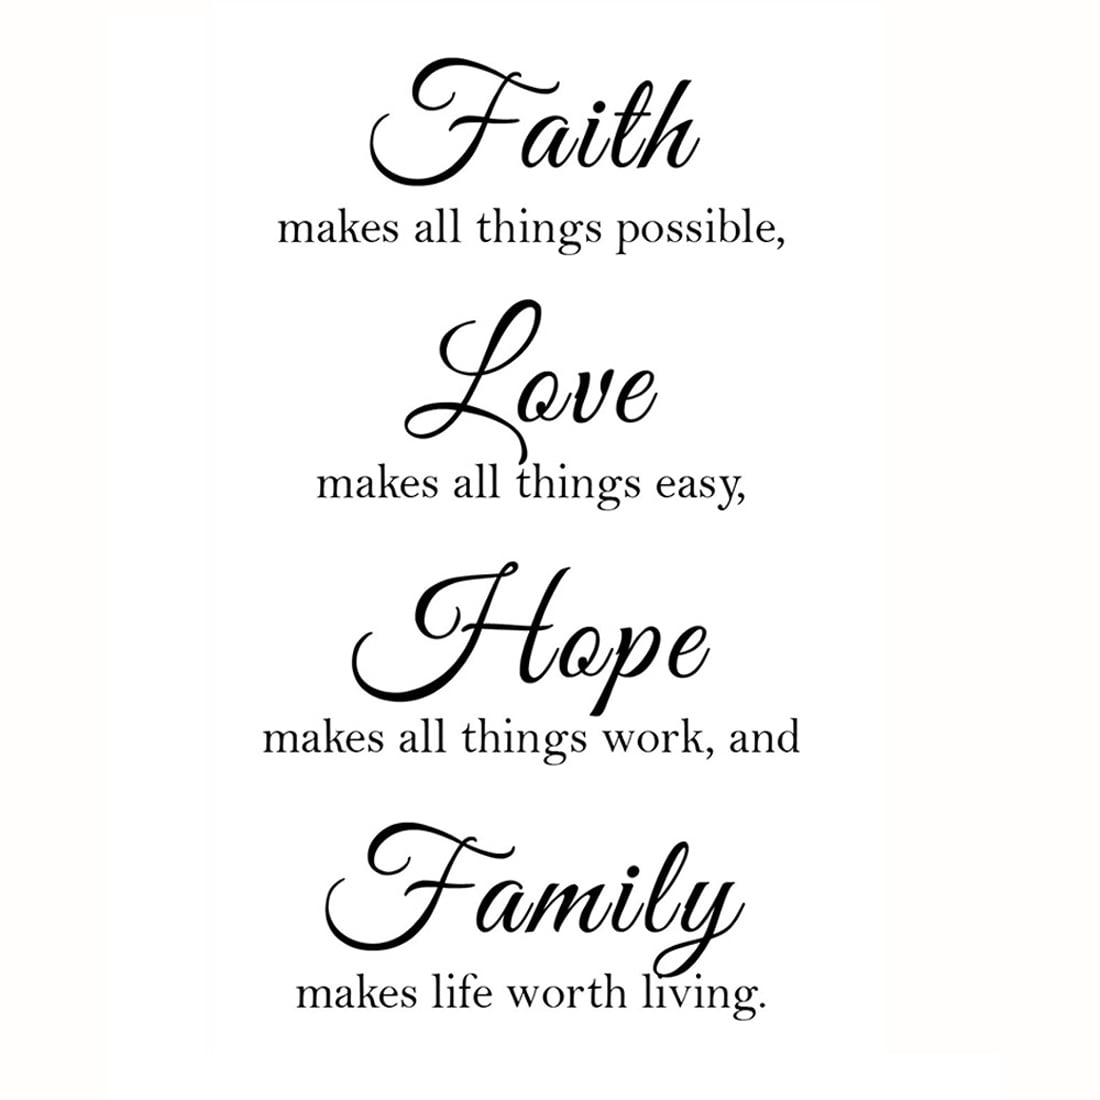 Family Wall Art 23 x 17" Decal Sticker Saying Quote lettering home decor love